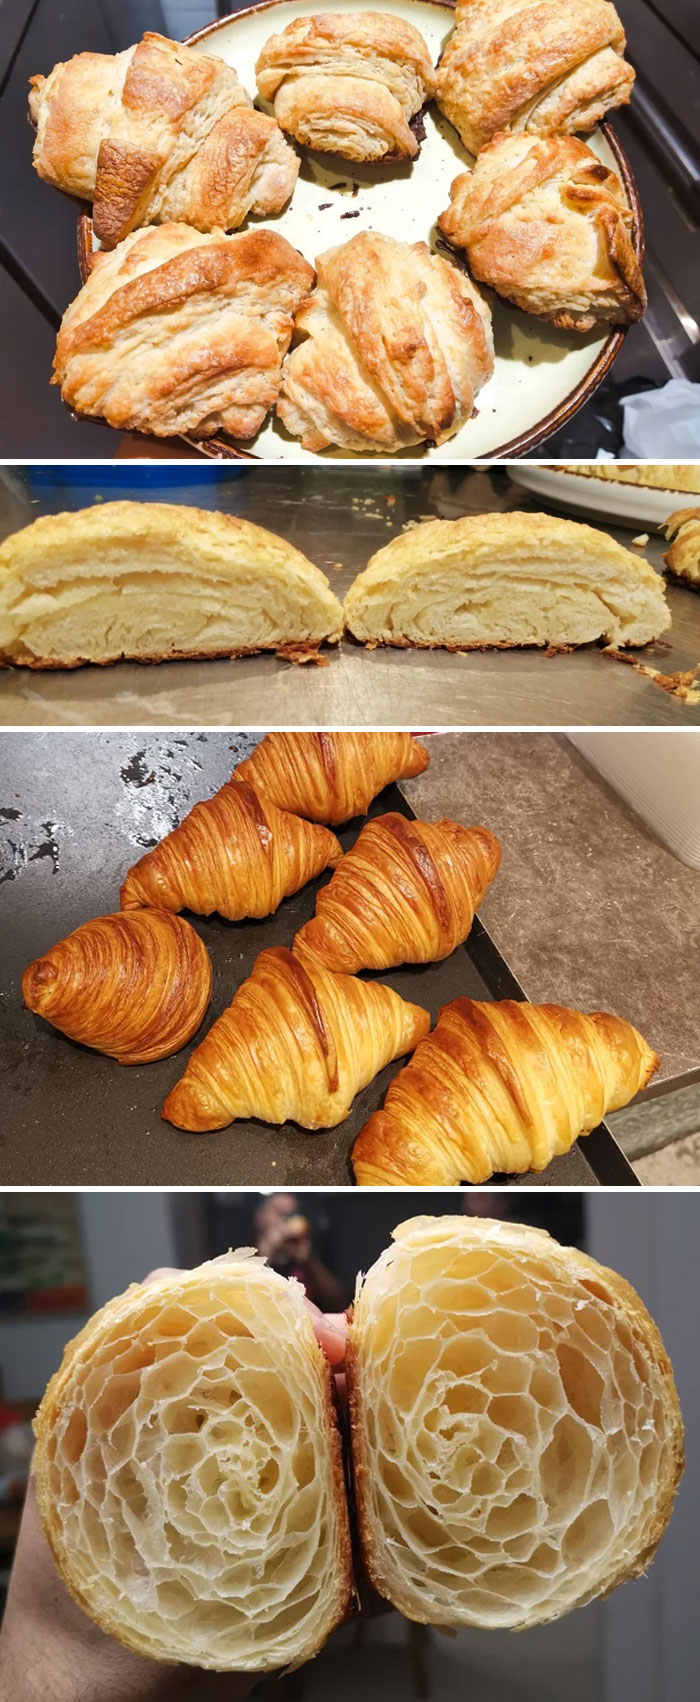 20 Tries At Making Croissants! Lots Of Advice From 2 Experts And Voila! Feels Good